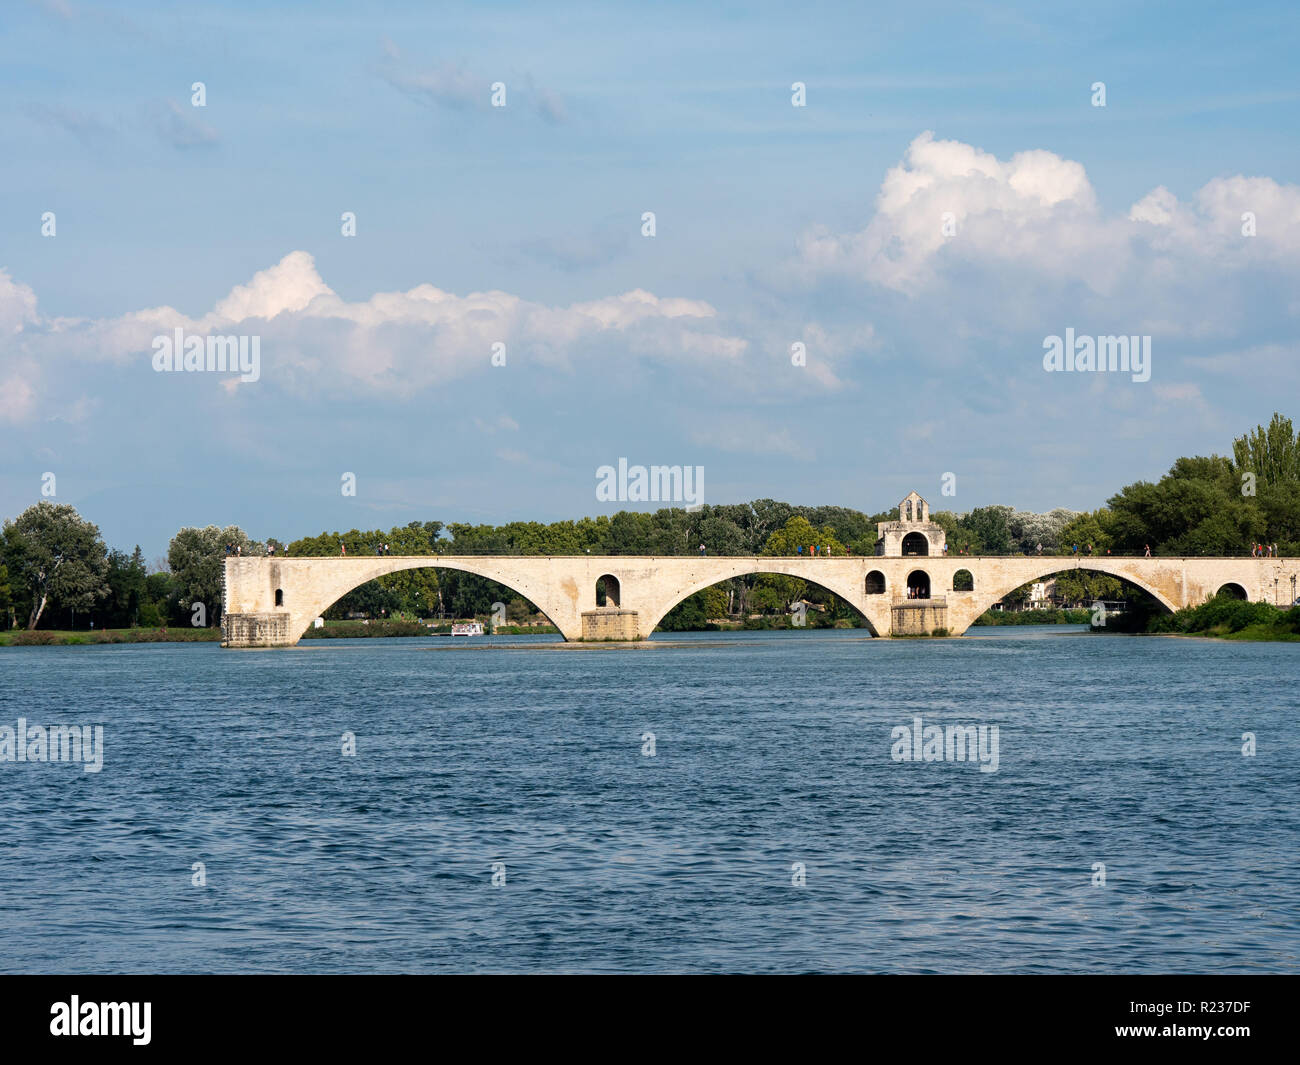 View on the Rhone river in Avignon, southern France. The river is crossed by a famous medieval bridge called the 'Pont d'Avignon' or 'Pont Saint-Bénéz Stock Photo